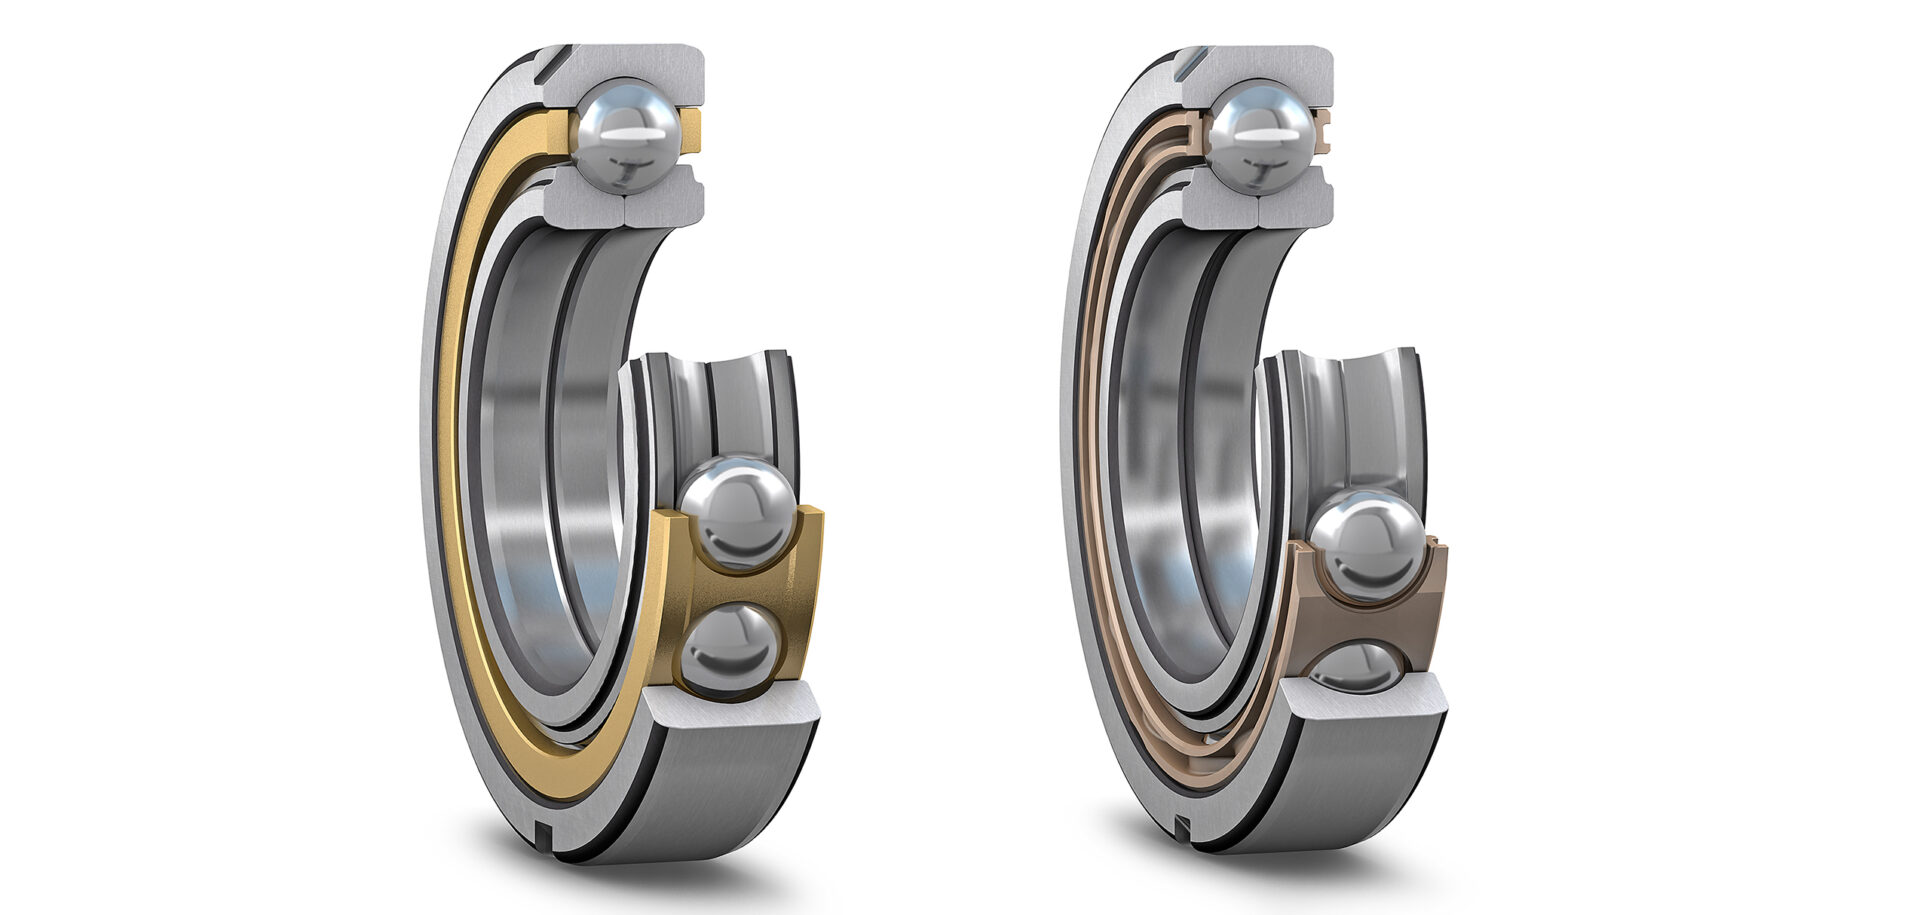 https://evolution.skf.com/wp-content/uploads/sites/5/2015/06/four-point-contact-ball-bearing-1920x915.jpg